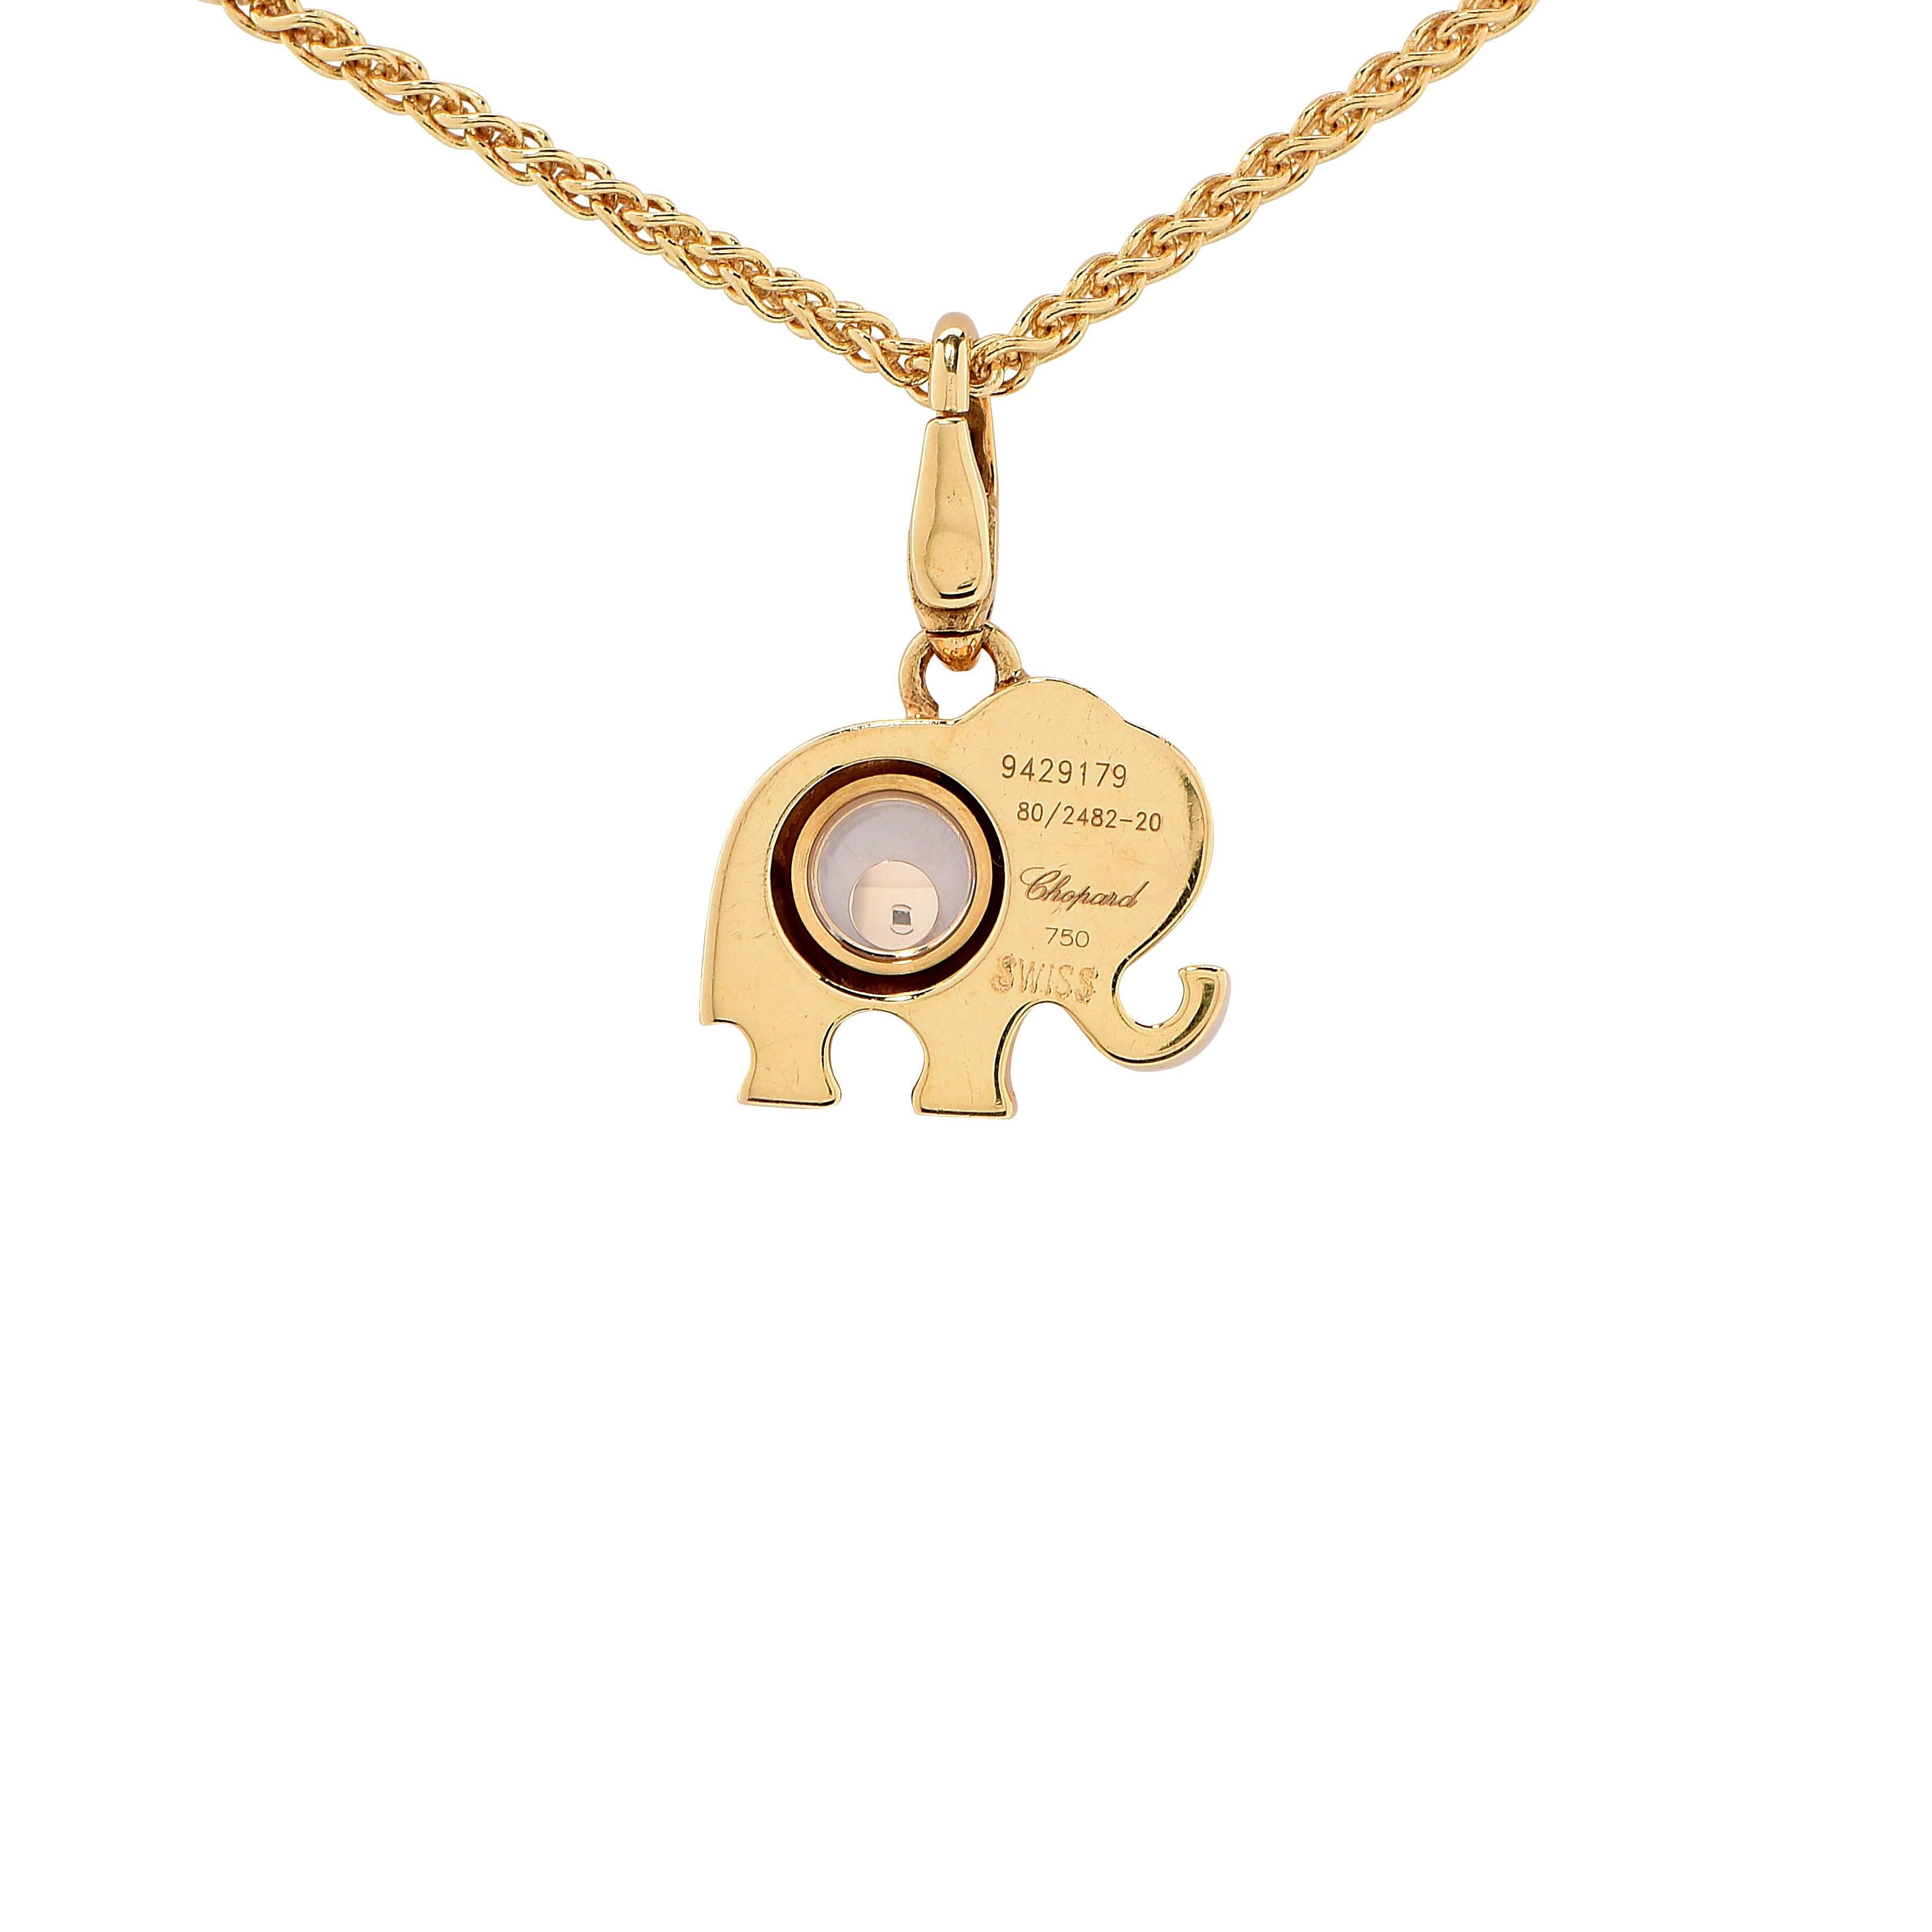 Chopard happy diamond and sapphire elephant pendant necklace.
This whimsical pendant by Chopard features one floating diamond and one blue sapphire eye. Chain Length is 17 inches. Pendant length is 13mm

Metal Type: 18Kt Yellow Gold
Metal Weight: